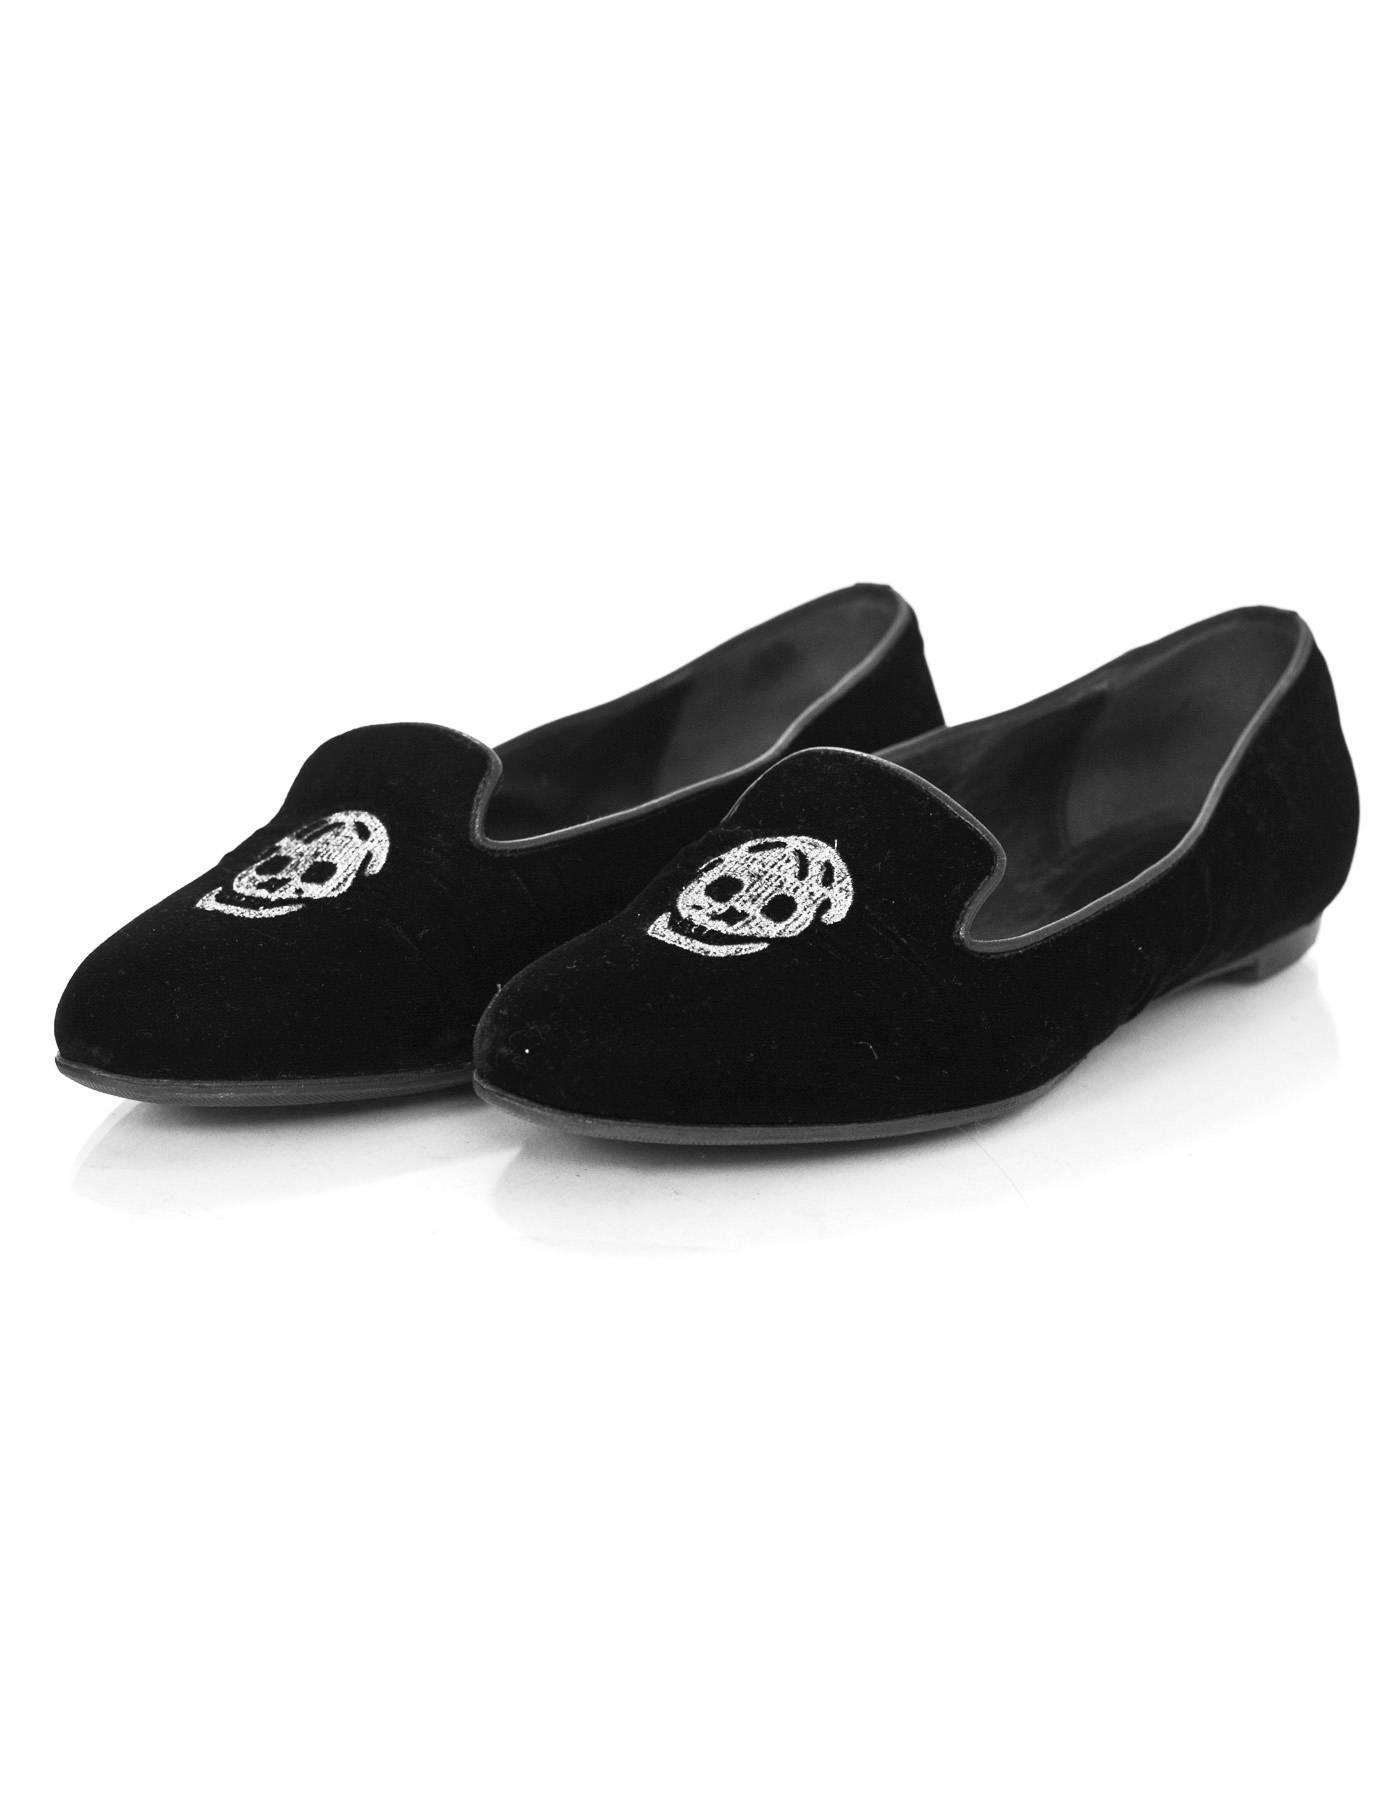 Alexander McQueen Black Velvet Skull Loafers Sz 35.5

Made In: Italy
Color: Black
Materials: Velvet
Closure/Opening: Slide on
Sole Stamp: CQ vero cuoio made in italy 35.5
Retail Price: $825 + tax
Overall Condition: Very good pre-owned condition with